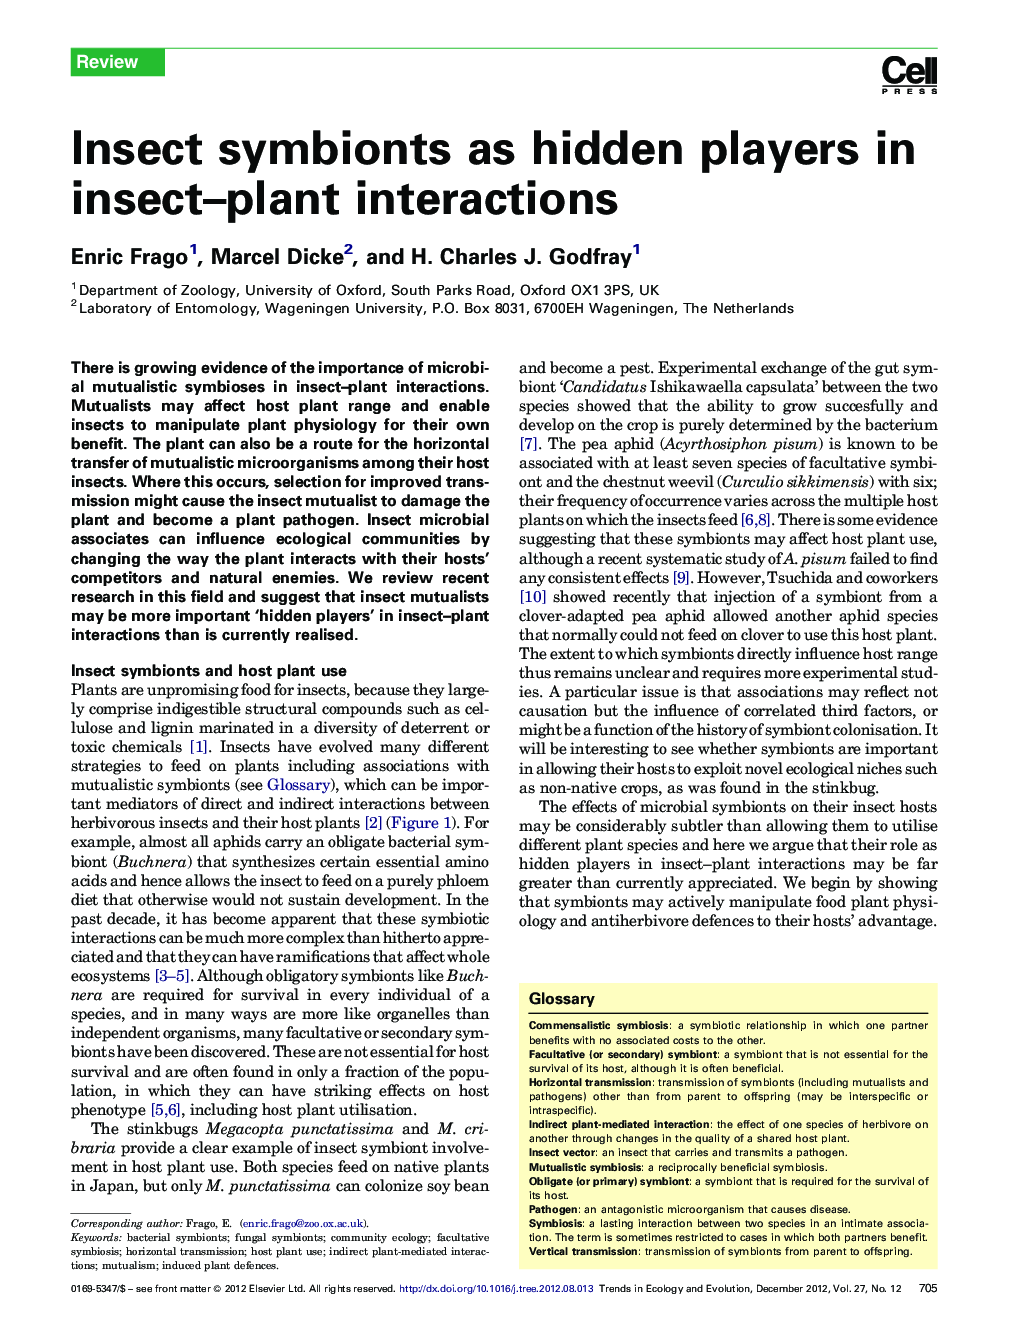 Insect symbionts as hidden players in insect–plant interactions